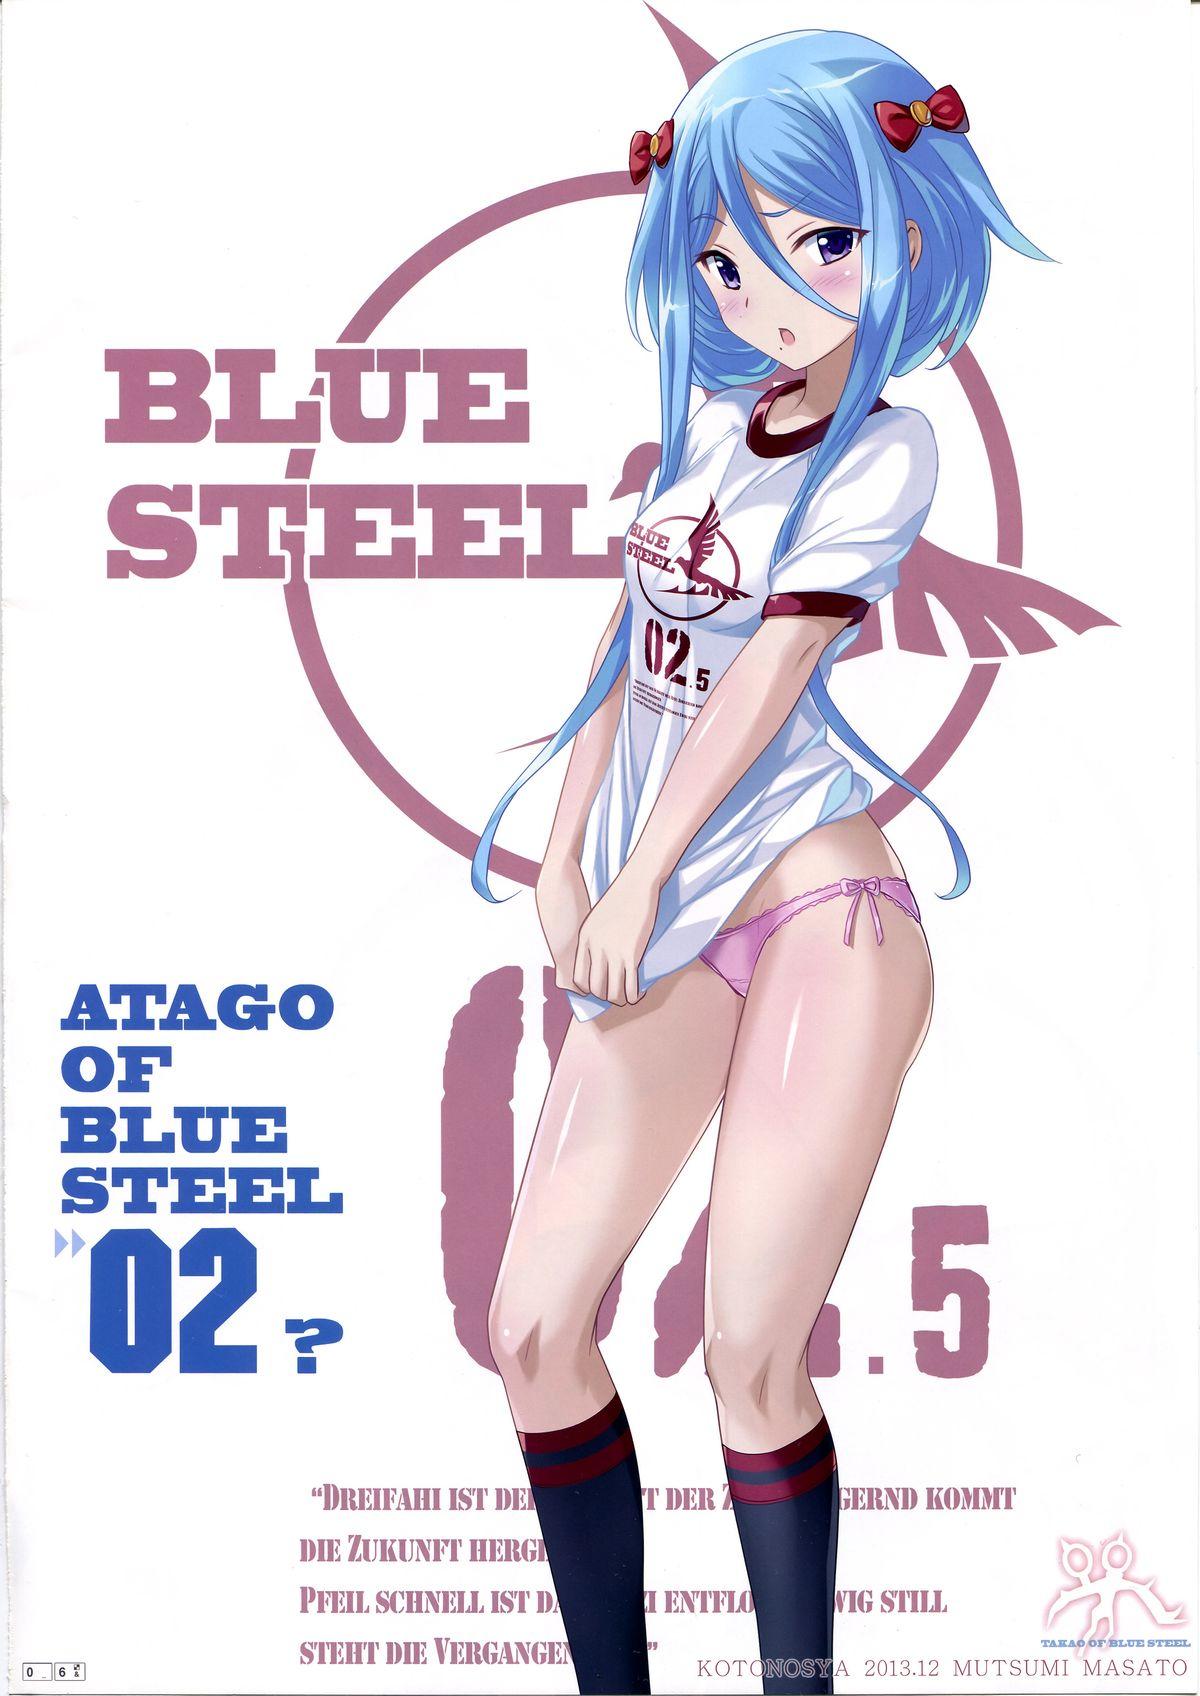 Blowjob TAKAO OF BLUE STEEL 02 - Arpeggio of blue steel Girl On Girl - Page 5